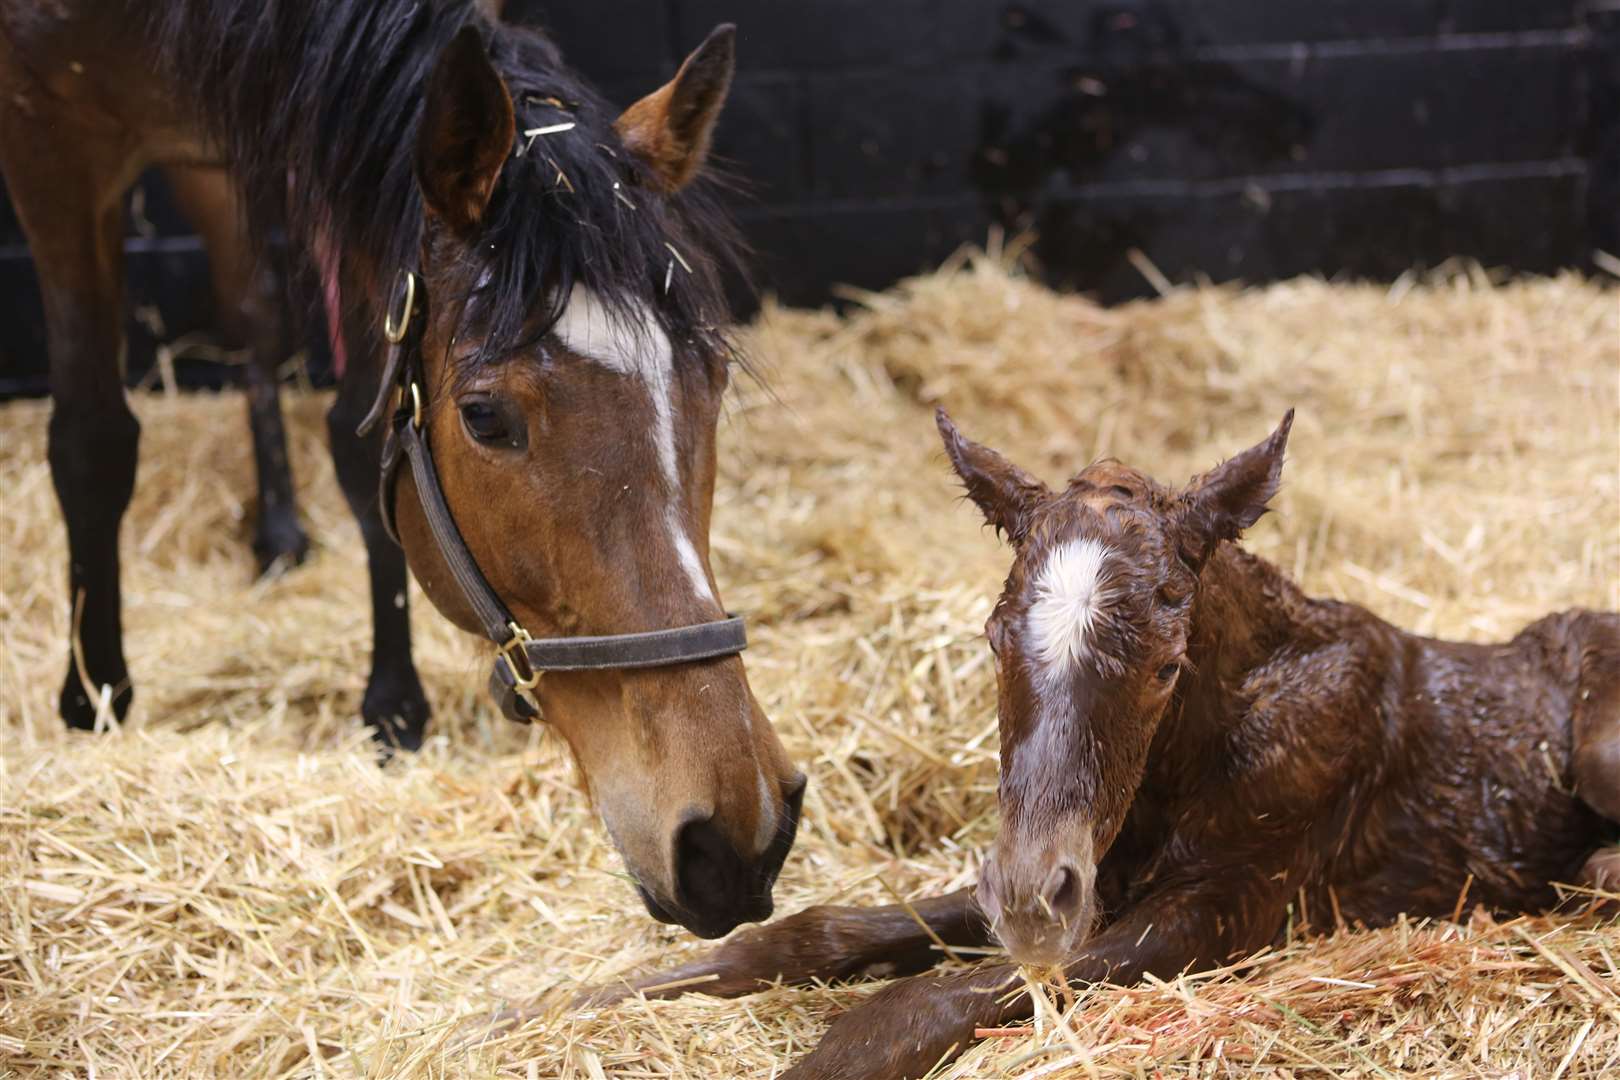 Dual Arc heroine Enable with her second foal, born on Saturday